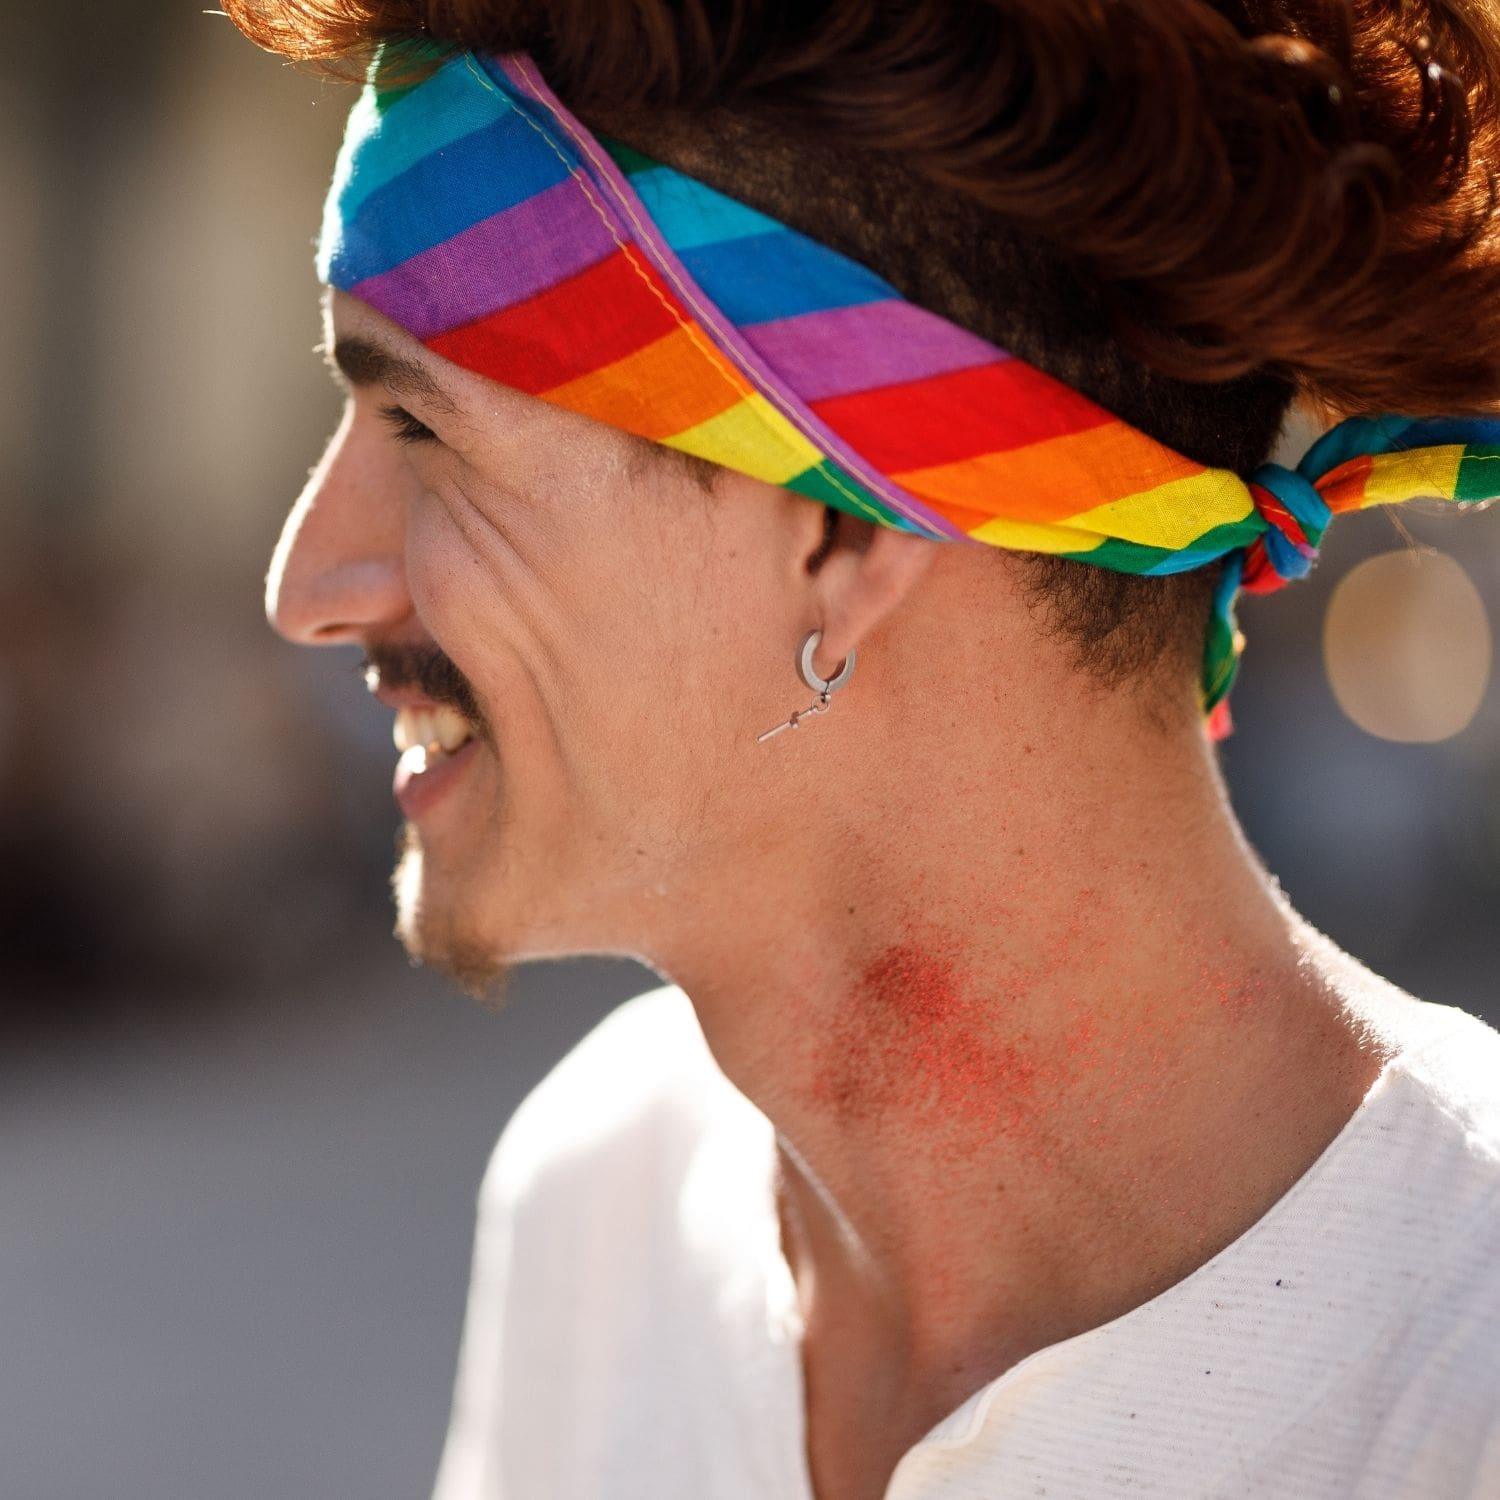 Captivating image of a young male smiling and sporting a TOMSCOUT LGBT rainbow pride bandana on the street, embodying the spirit of pride and freedom. Perfect for Singapore's LGBT community seeking to express their identity with fashionable, eye-catching accessories.